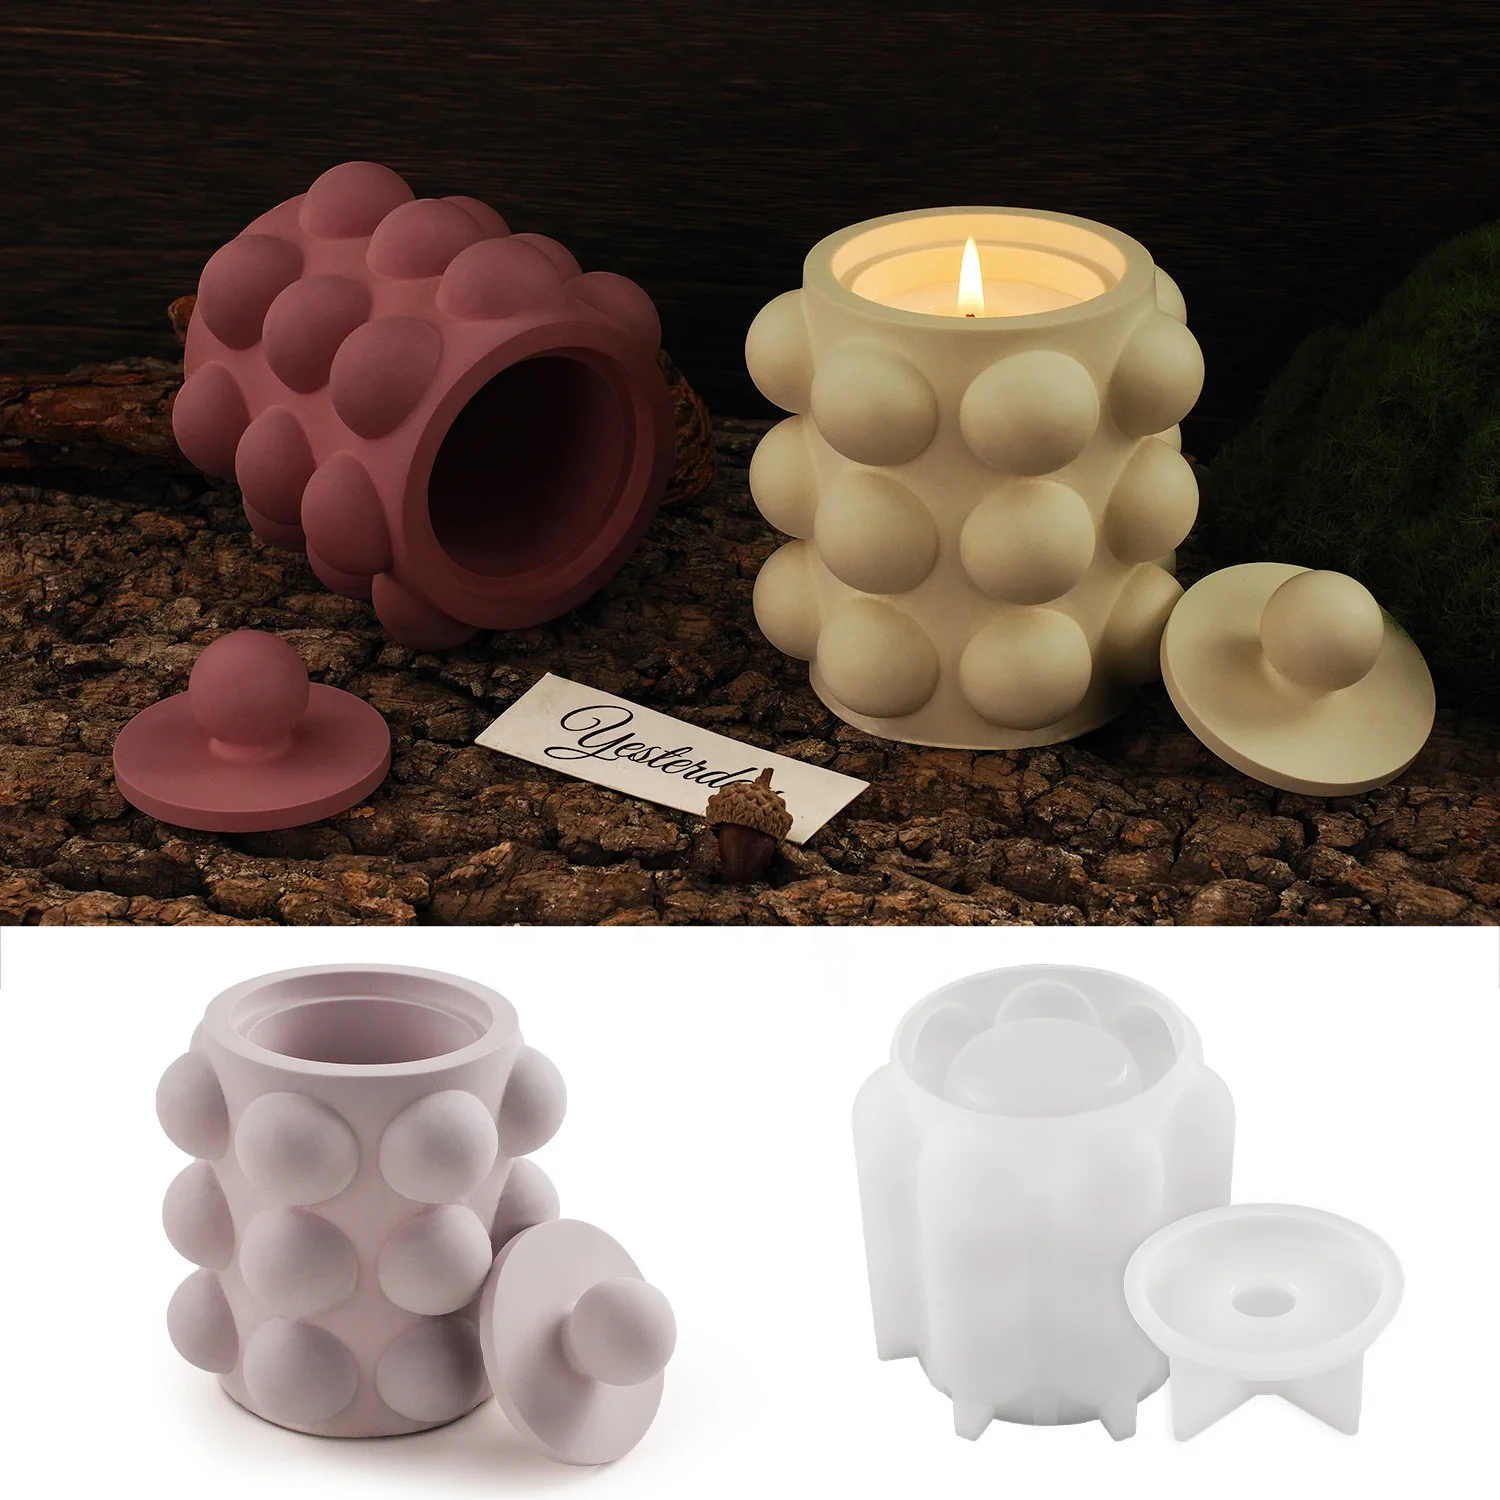 

CARATTE Bubble Polka Dot Candle Jar Silicone Mold With Lid Gypsum Concrete Flower Pot Vase Mold